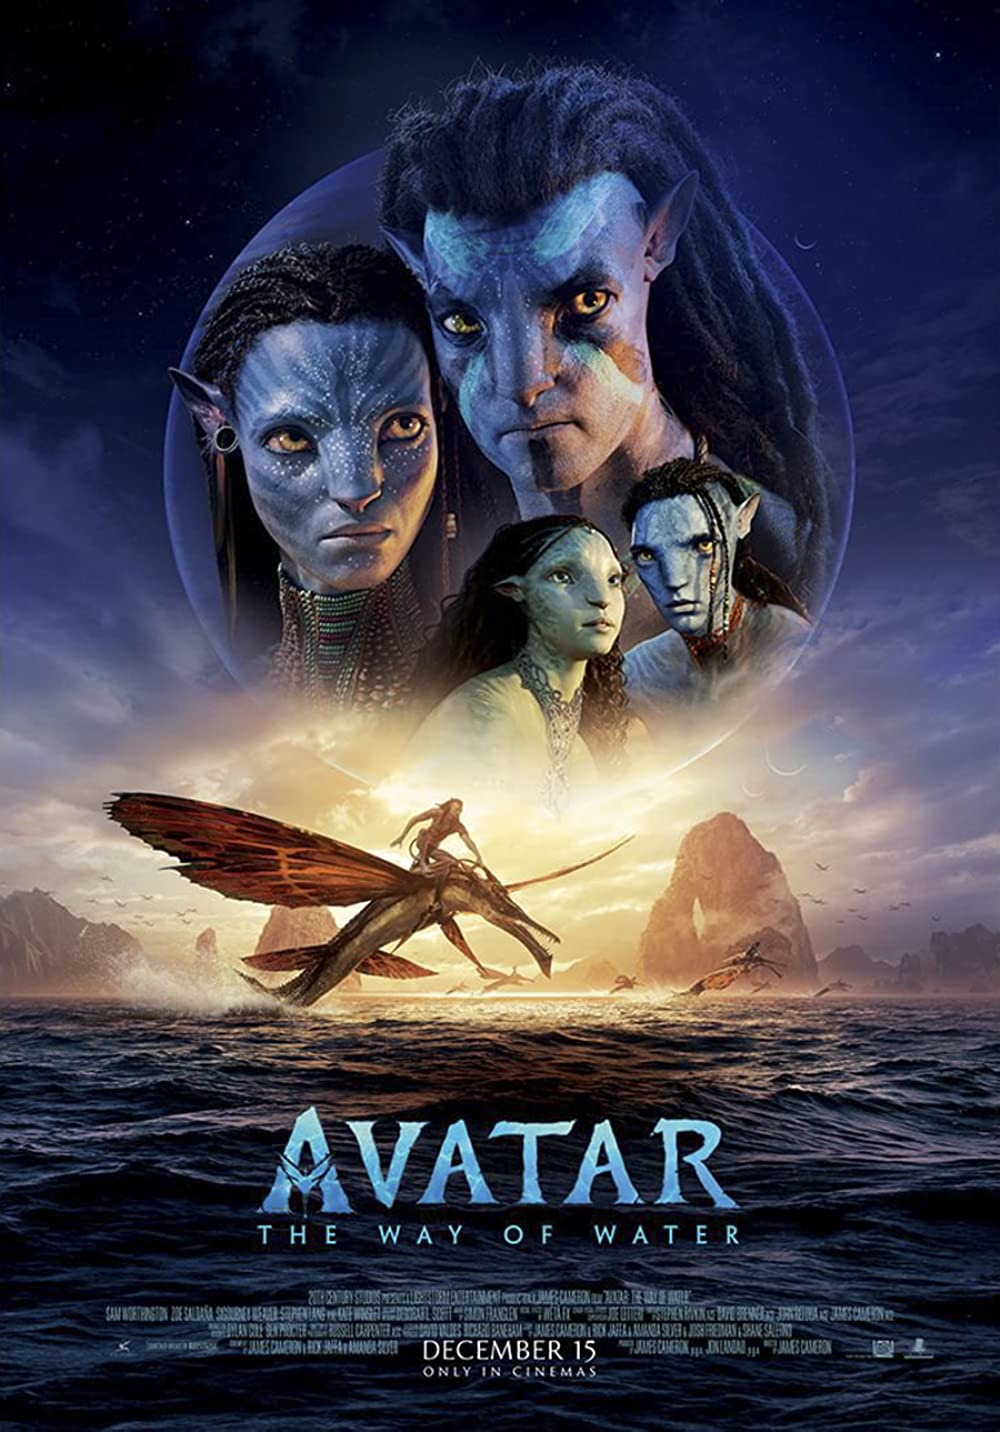 Avatar The Way Of Water - (06/24)